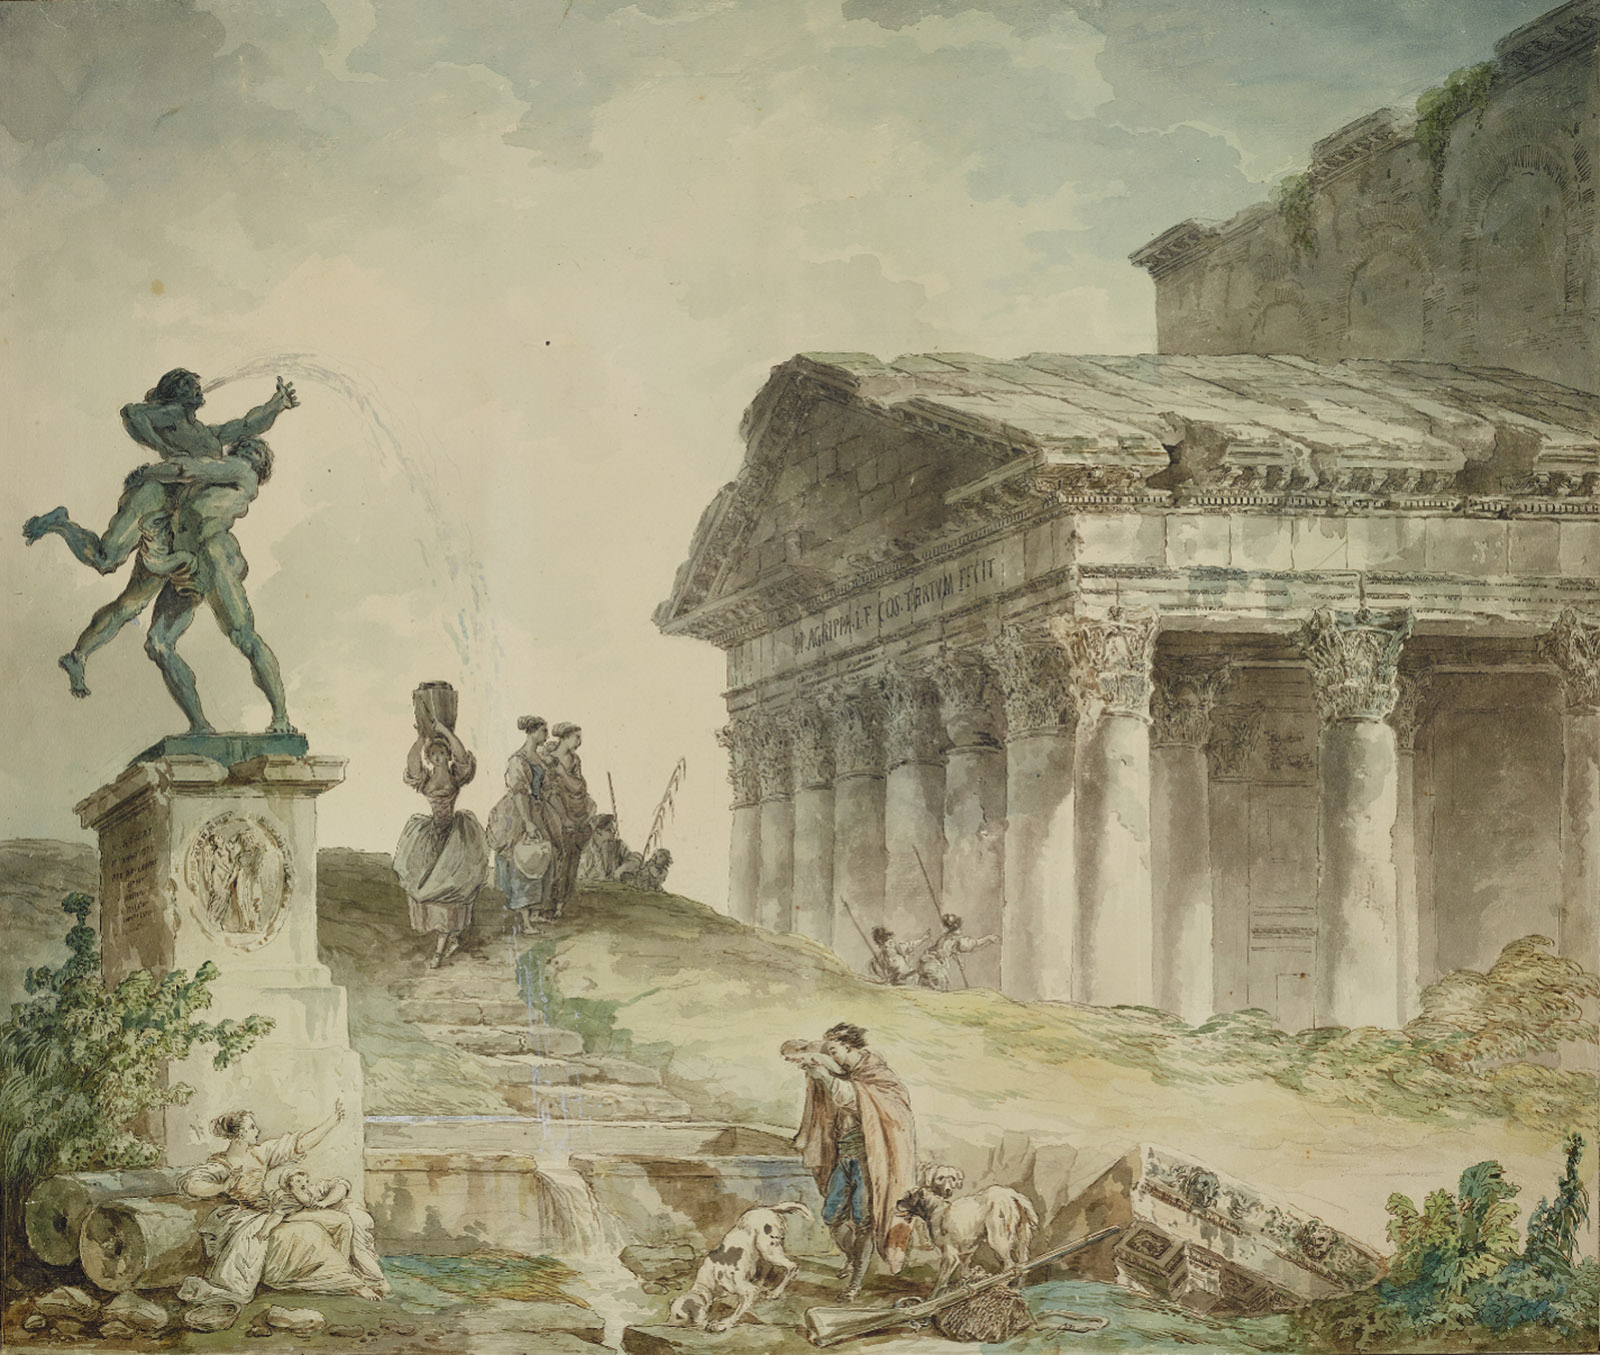 Hubert Robert: Capriccio with the Portico of the Pantheon and a Statue of Hercules and Antaeus, 22 11/16 x 26 7/16 inches, 1774